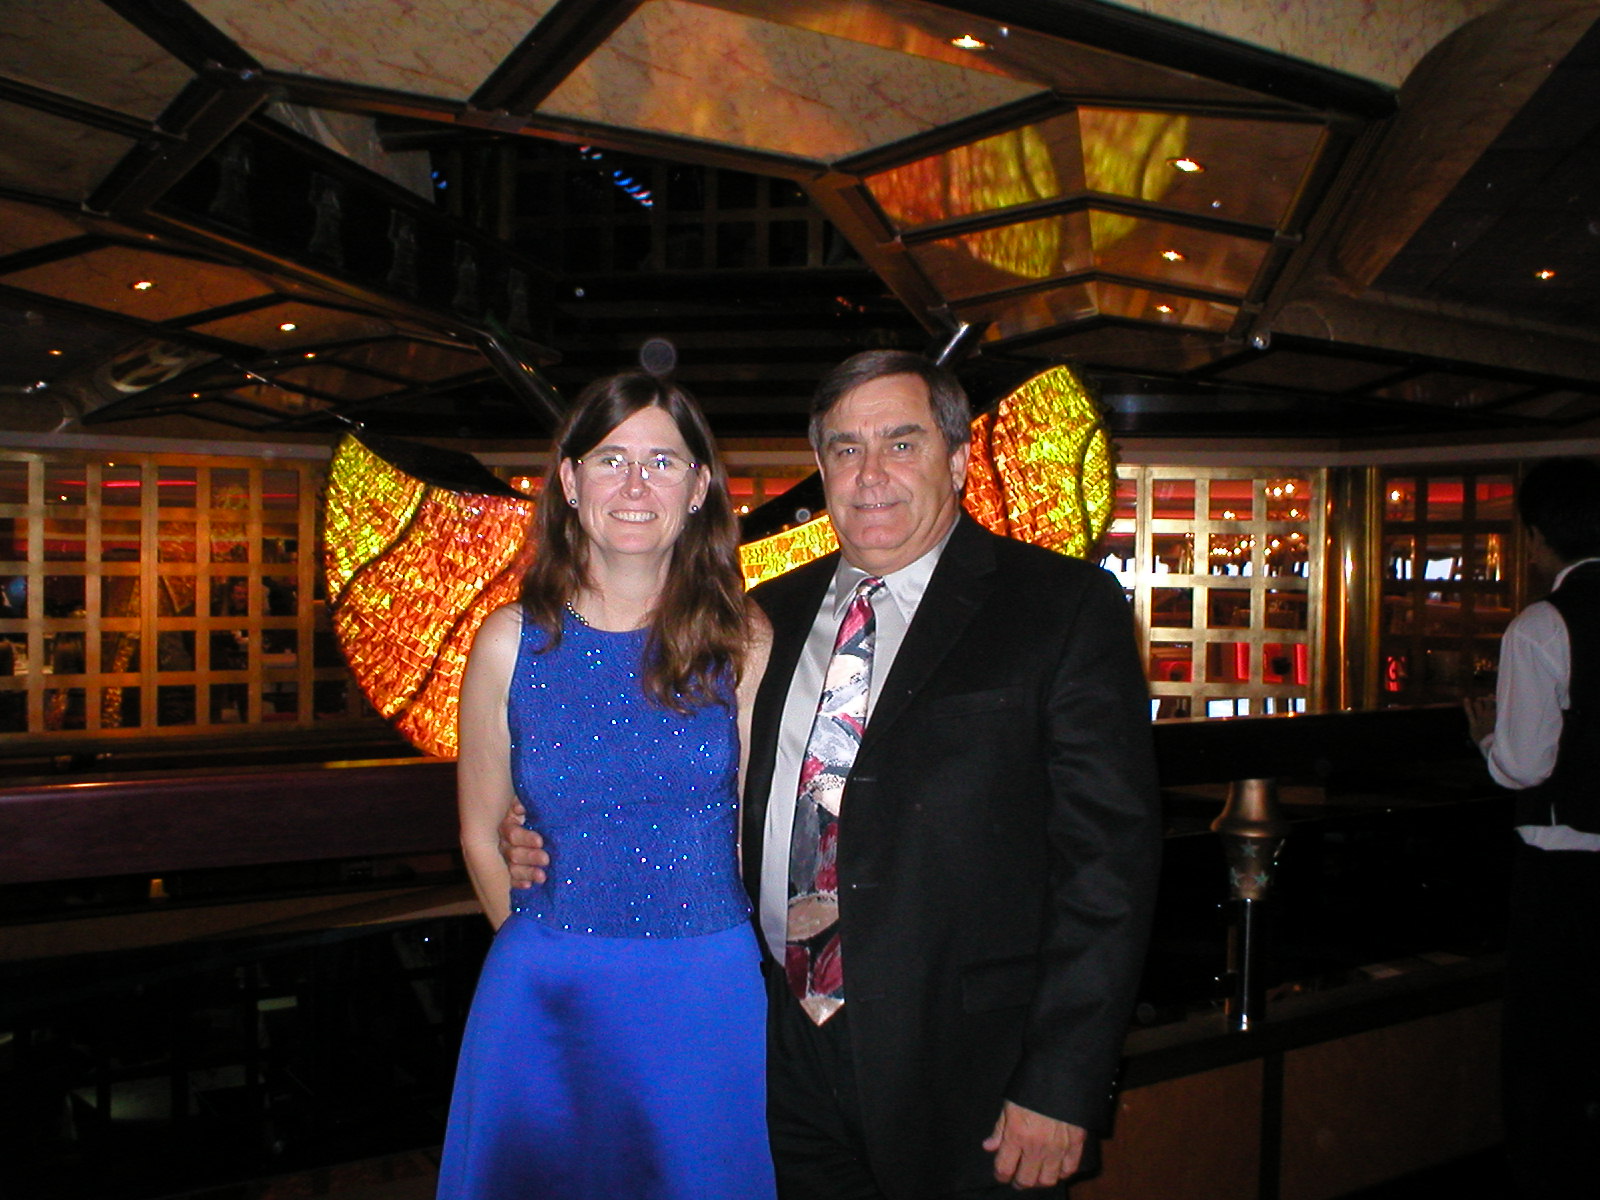 Jeanne & Dave at Formal Night